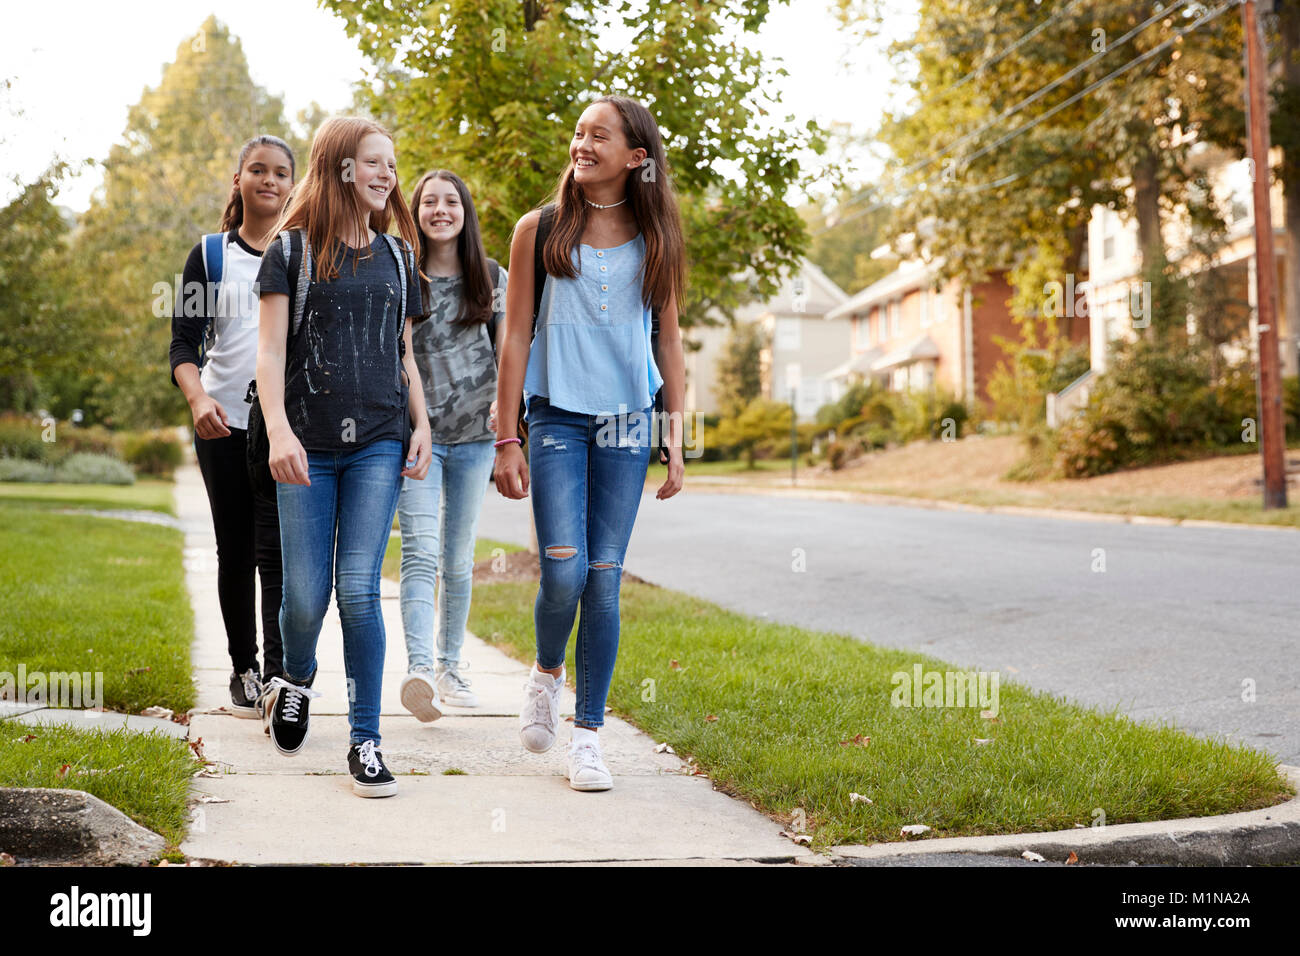 Four young teen girls walking to school together, front view Stock Photo